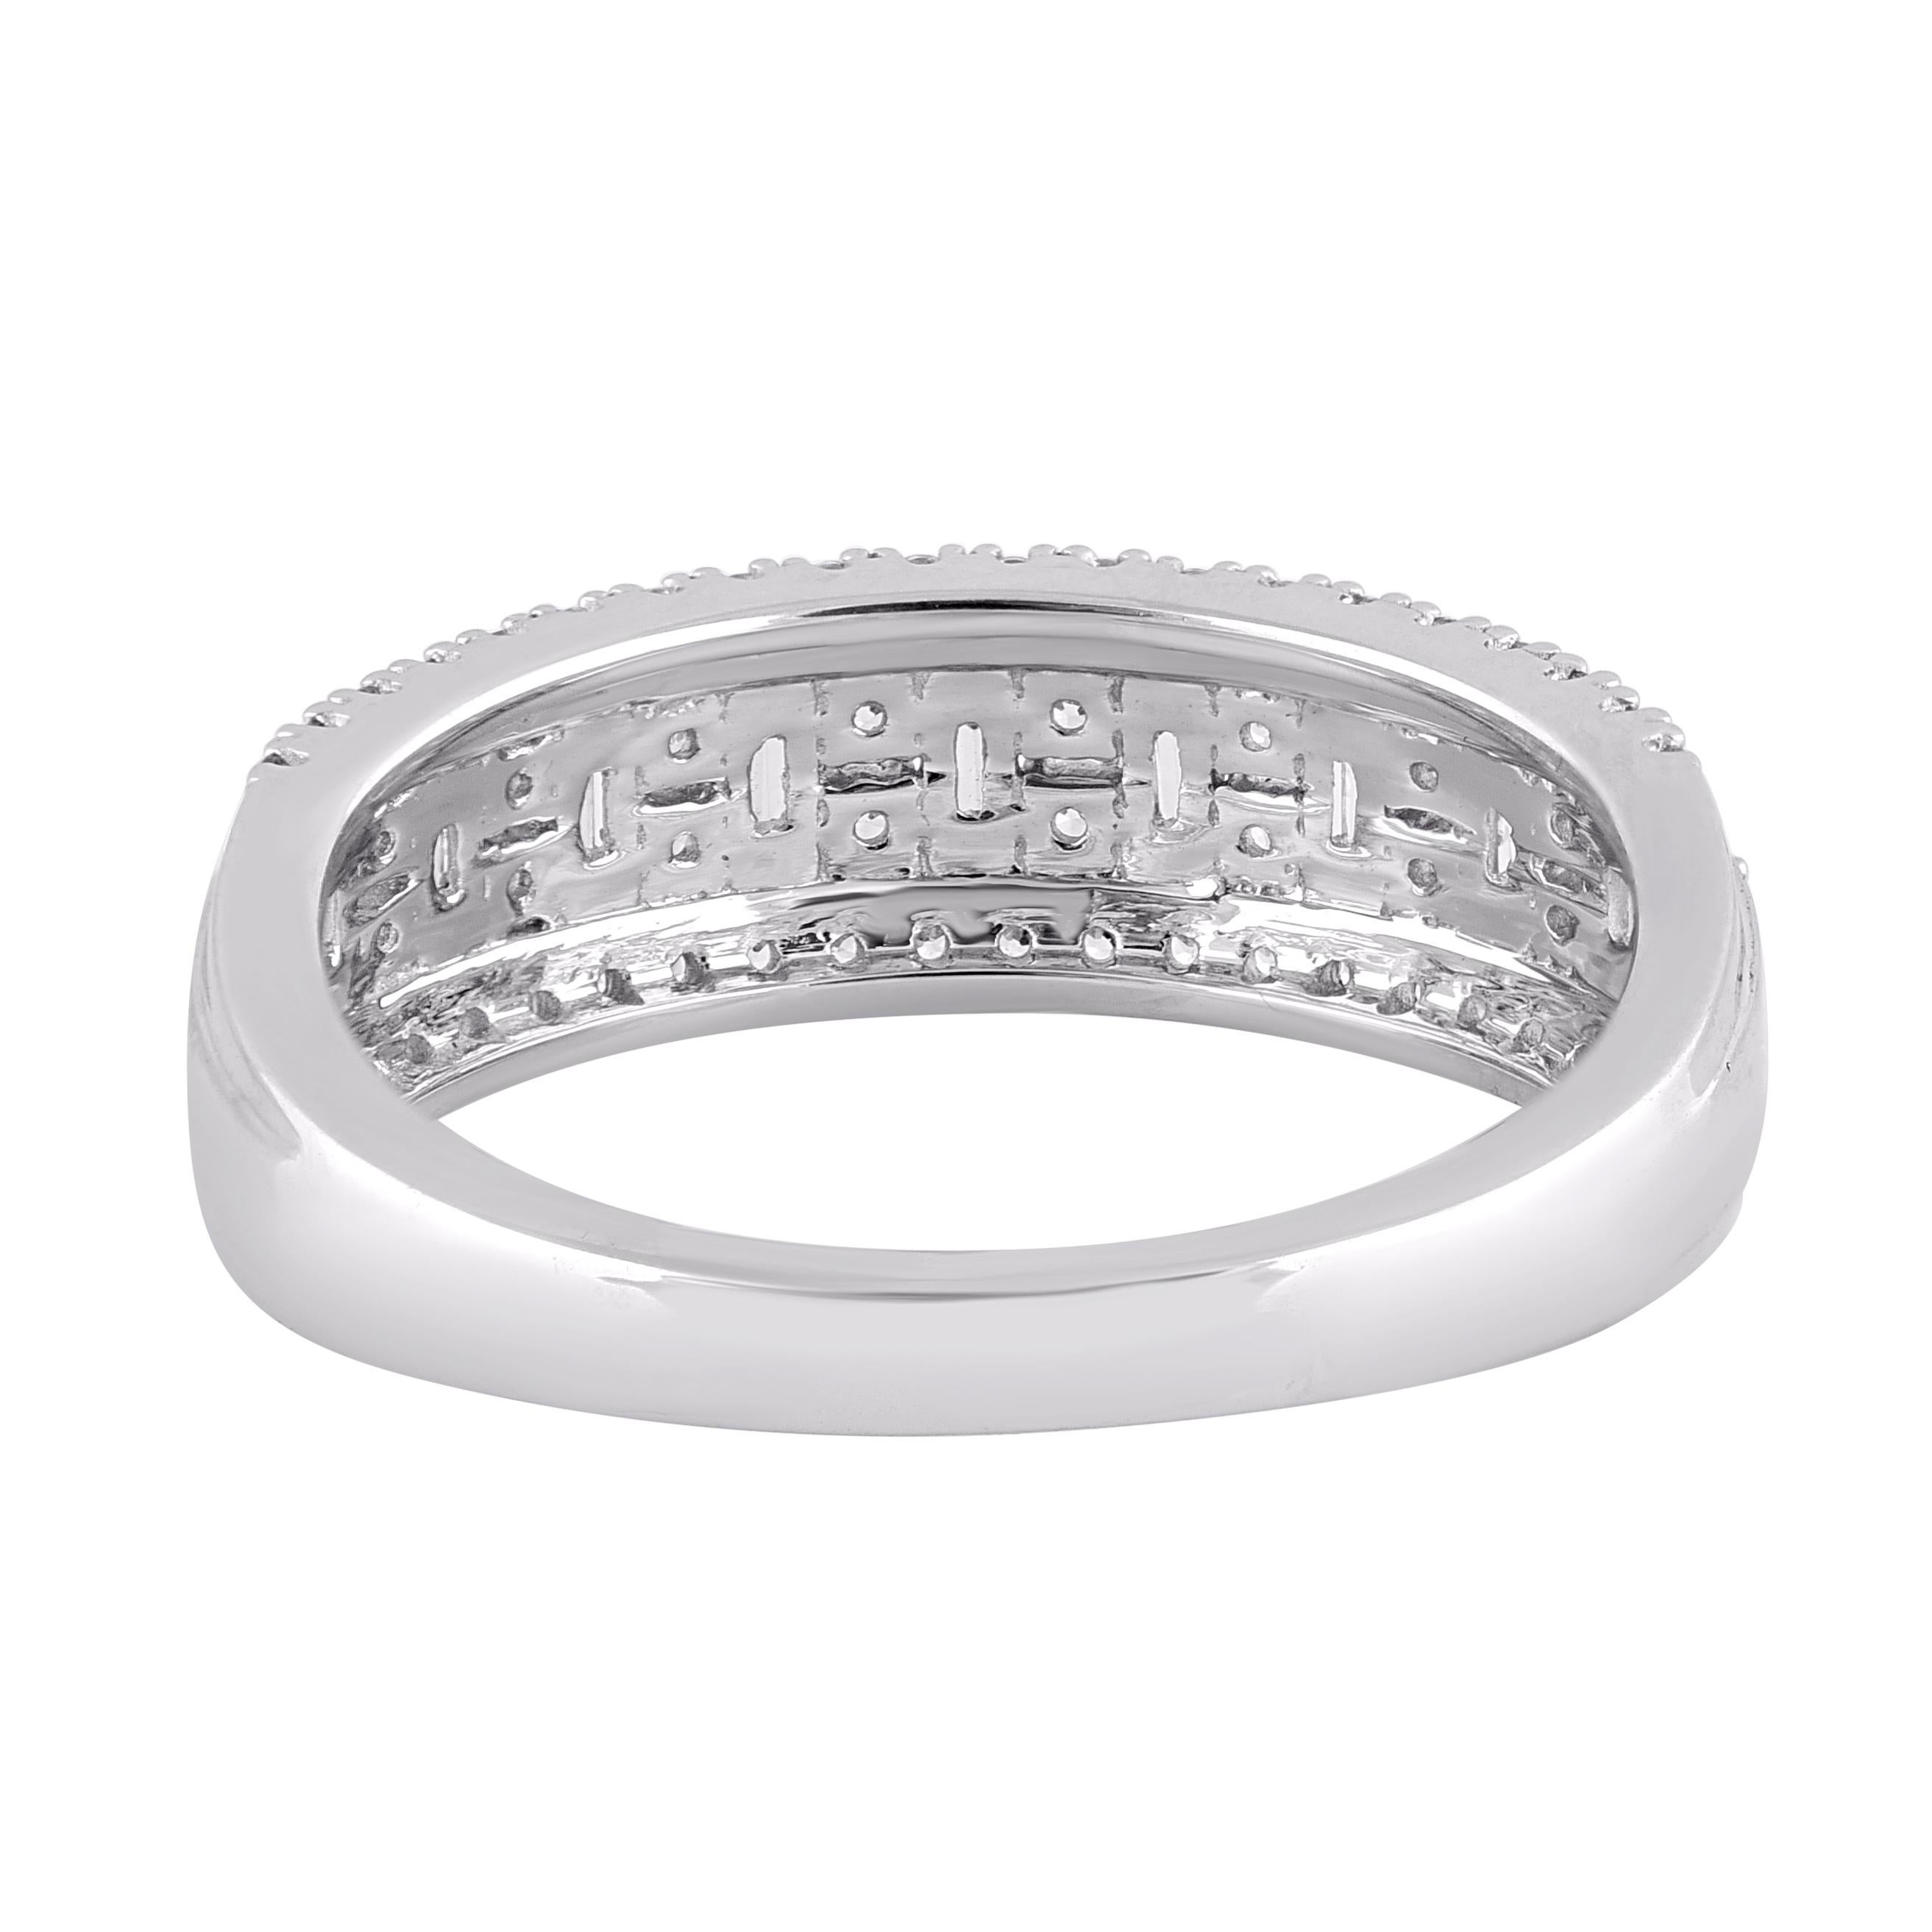 TJD 0.50 Carat Round and Baguette Diamond 14 Karat White Gold Wedding Band Ring In New Condition For Sale In New York, NY